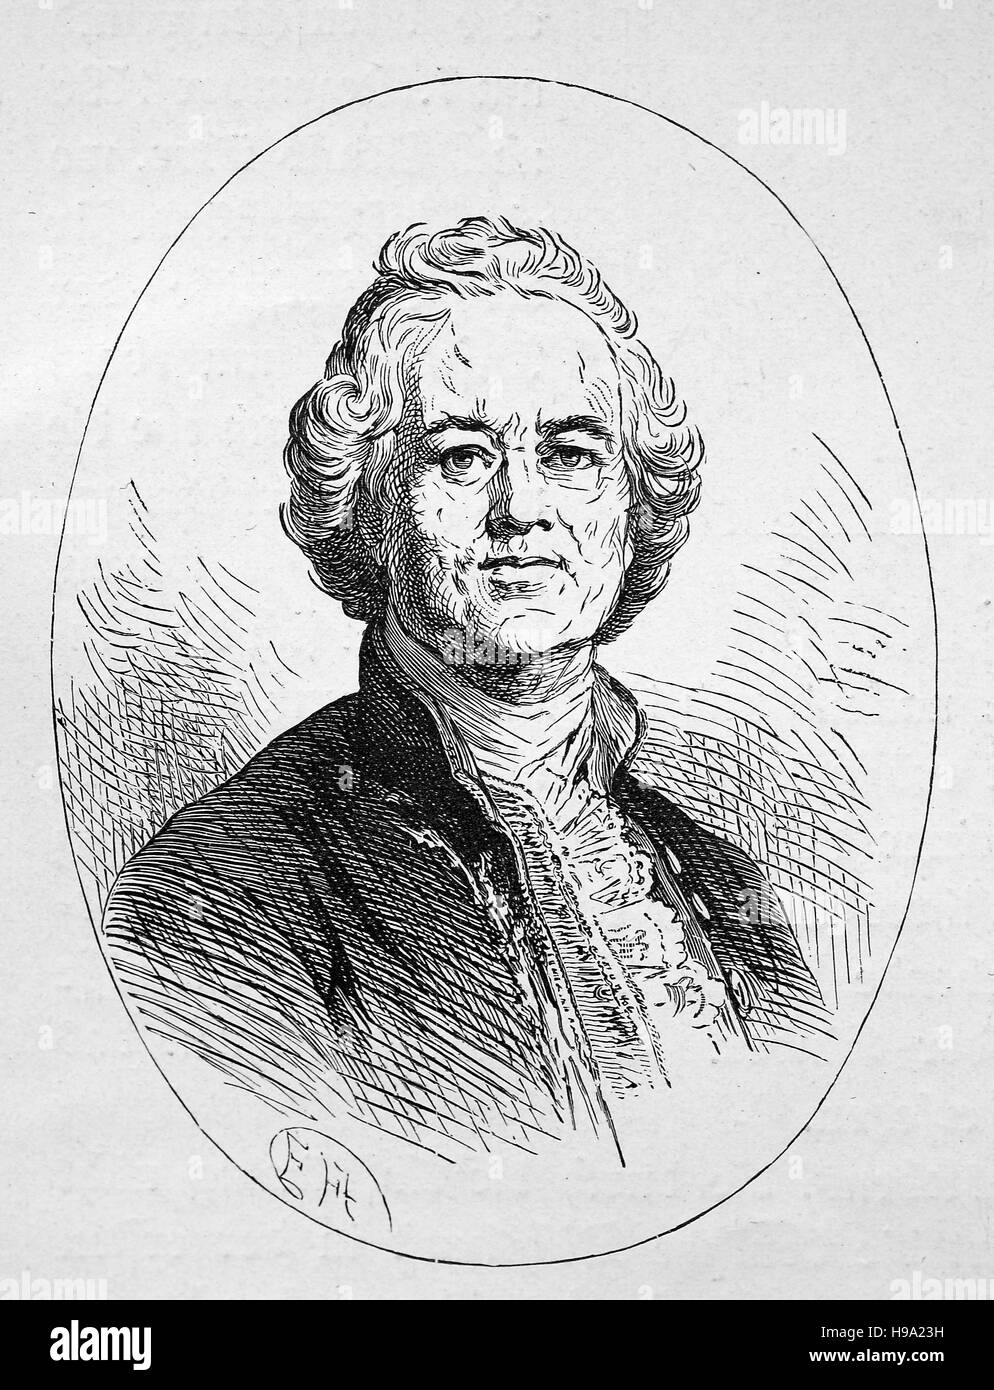 Christoph Willibald Ritter von Gluck, 2 July 1714 - 15 November 1787, was a composer of Italian and French opera in the early classical period, historical illustration Stock Photo